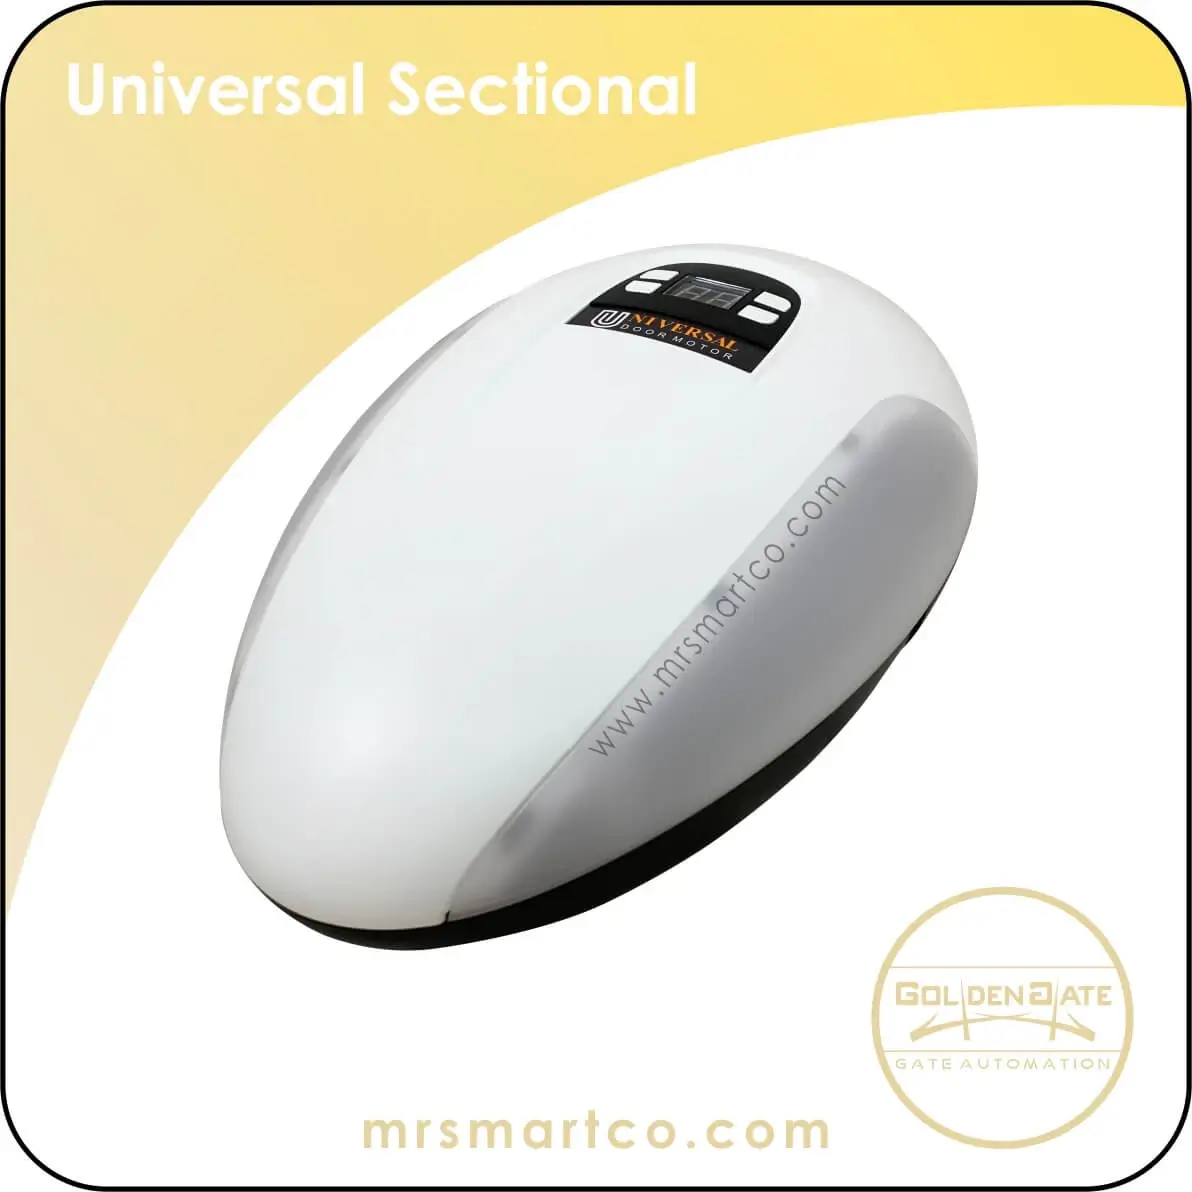 Universal Sectional